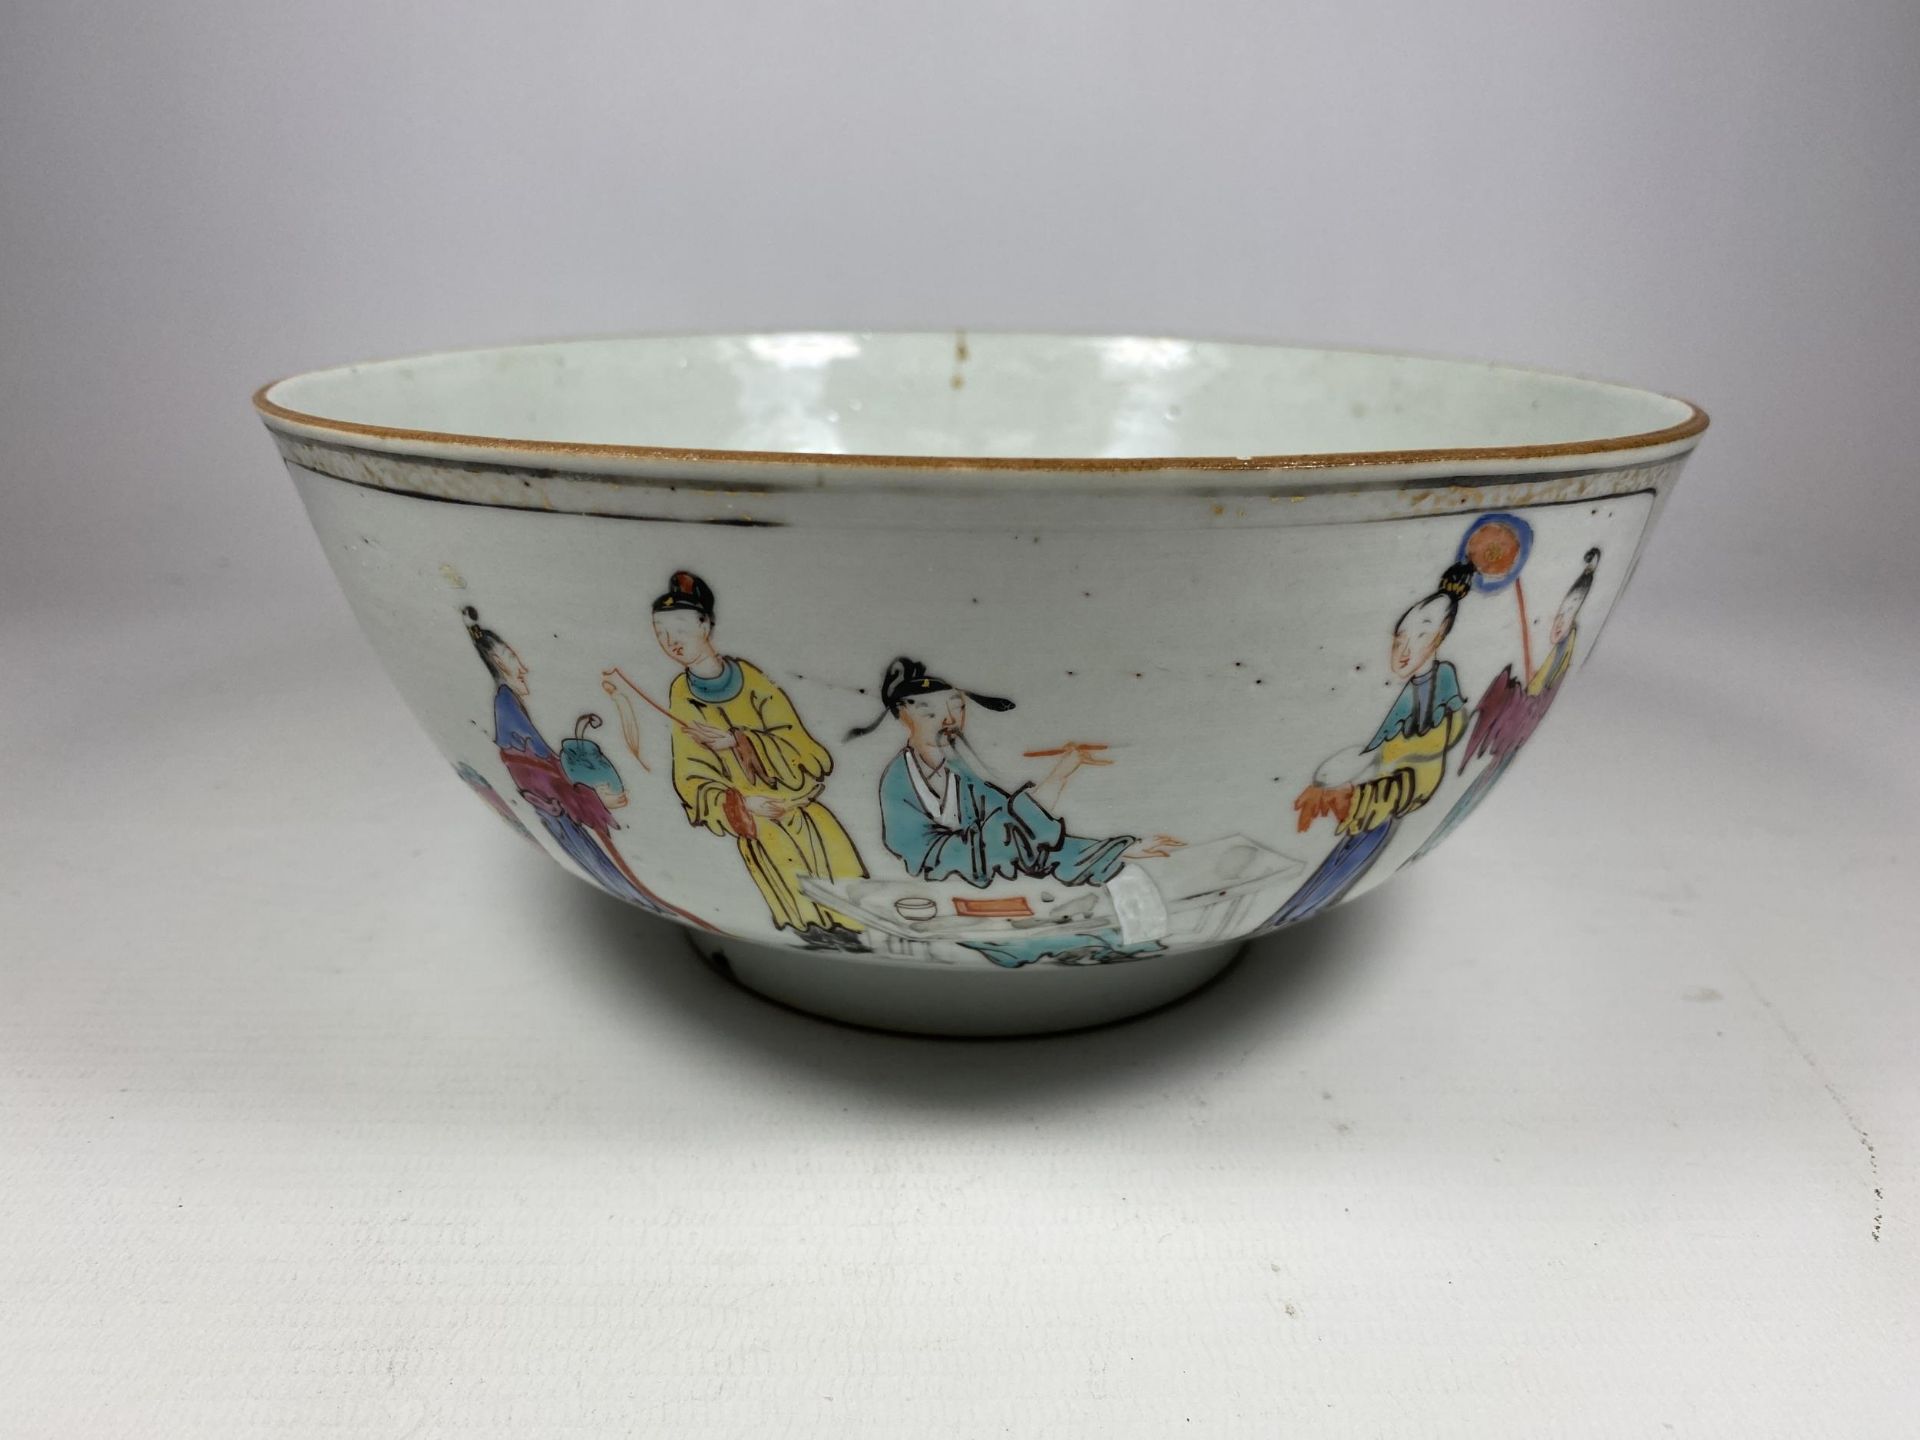 A LATE 18TH / EARLY 19TH CENTURY CHINESE PORCELAIN BOWL WITH ENAMELLED FIGURE DESIGN, DIAMETER 20CM